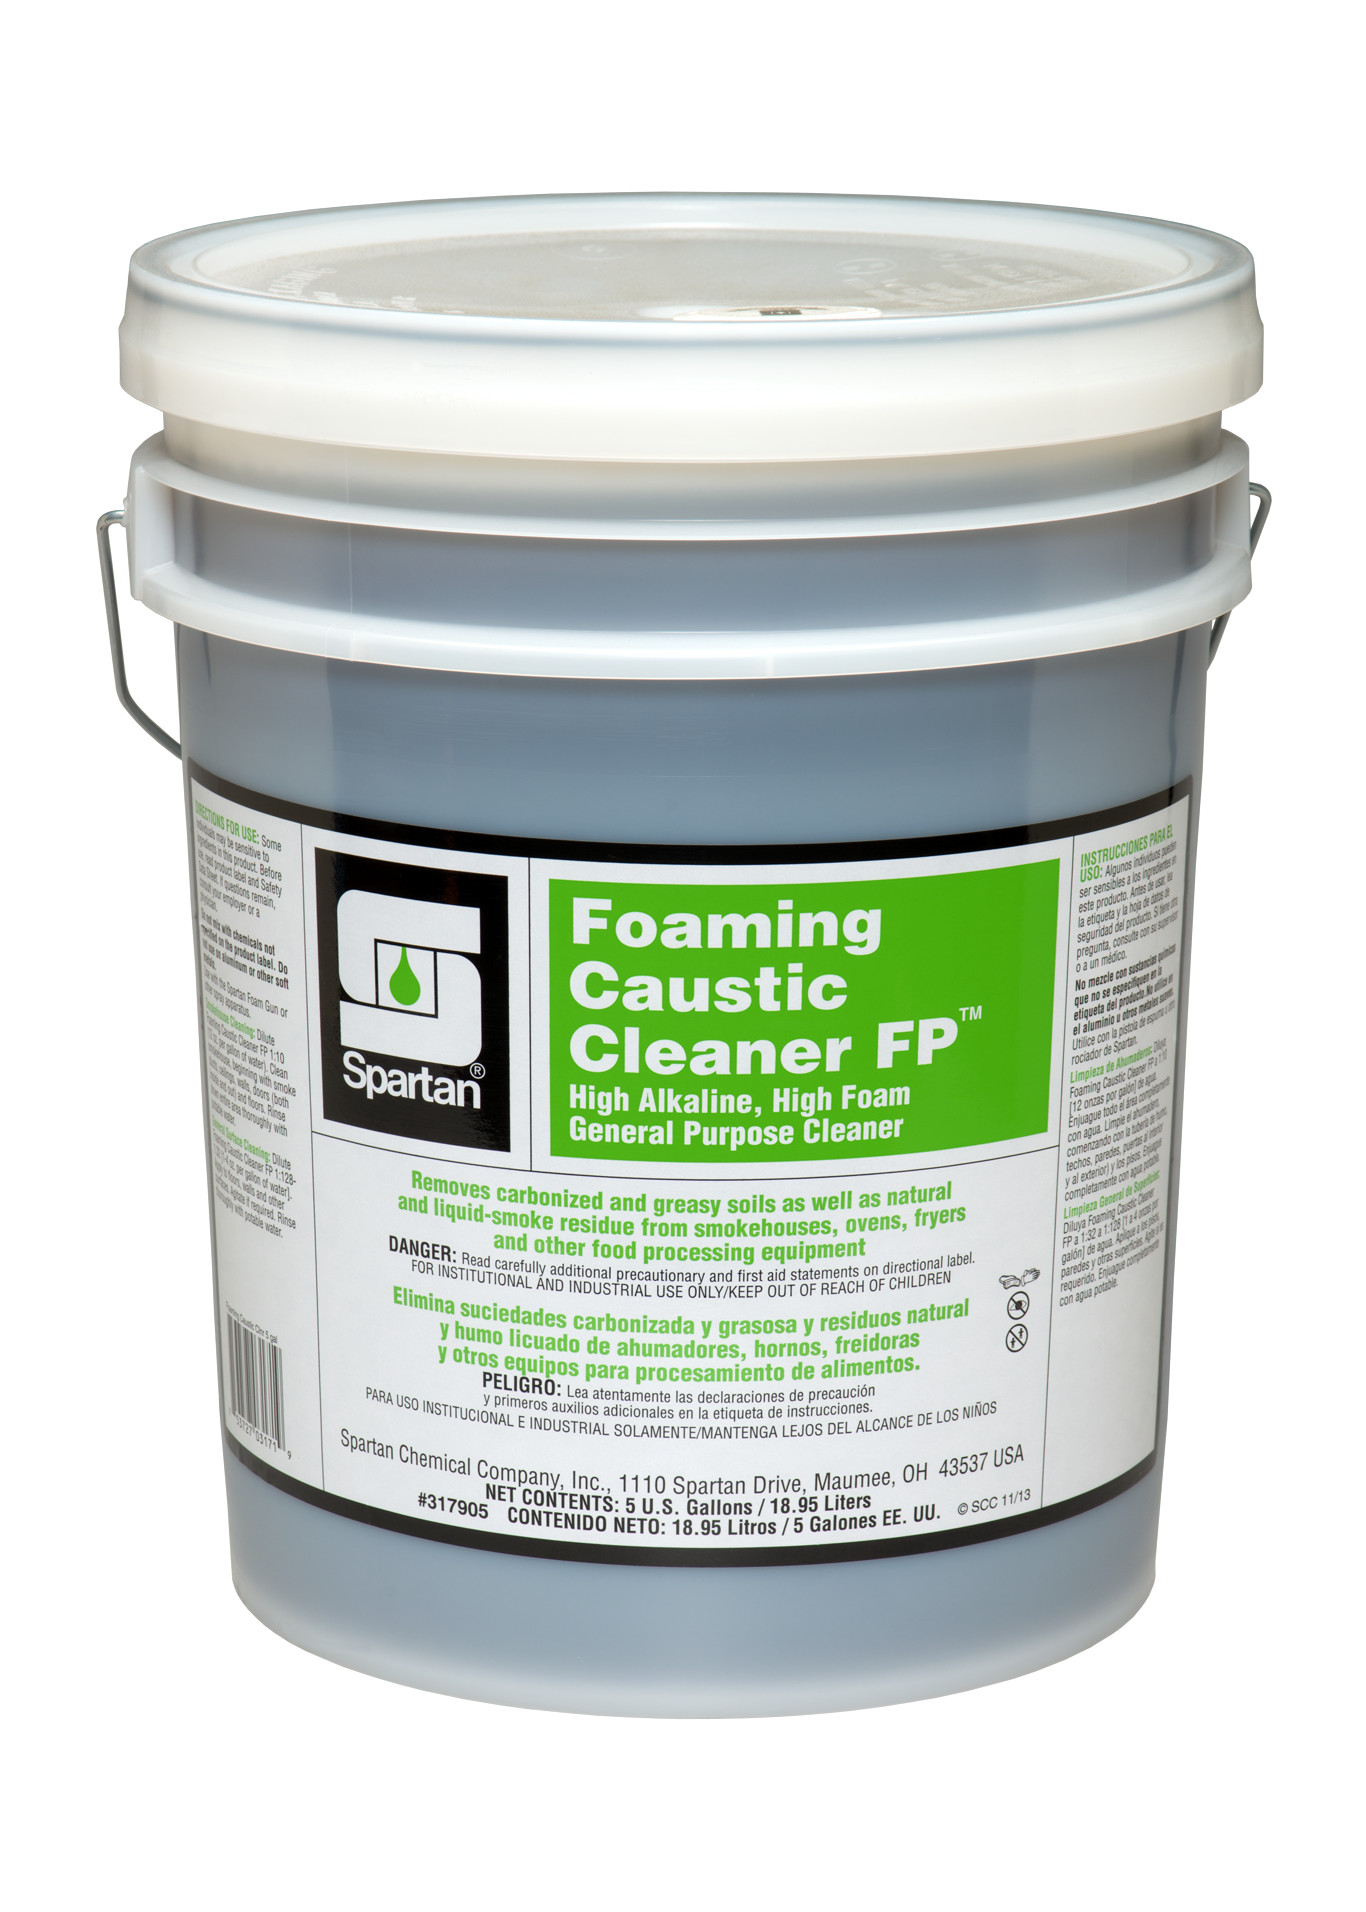 Spartan Chemical Company Foaming Caustic Cleaner FP, 5 GAL PAIL